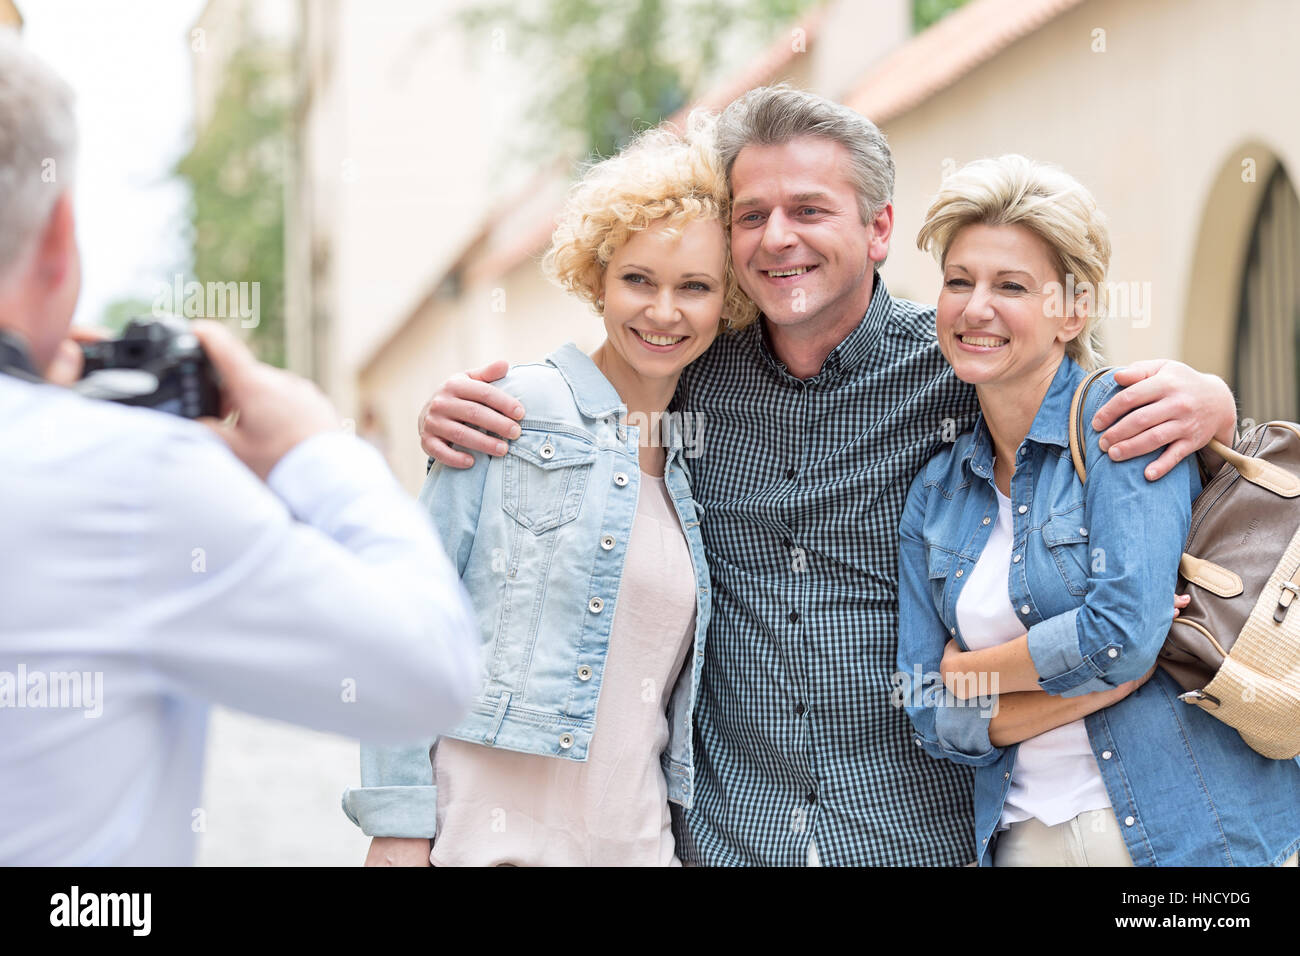 Rear view of man photographing male and female friends in city Stock Photo